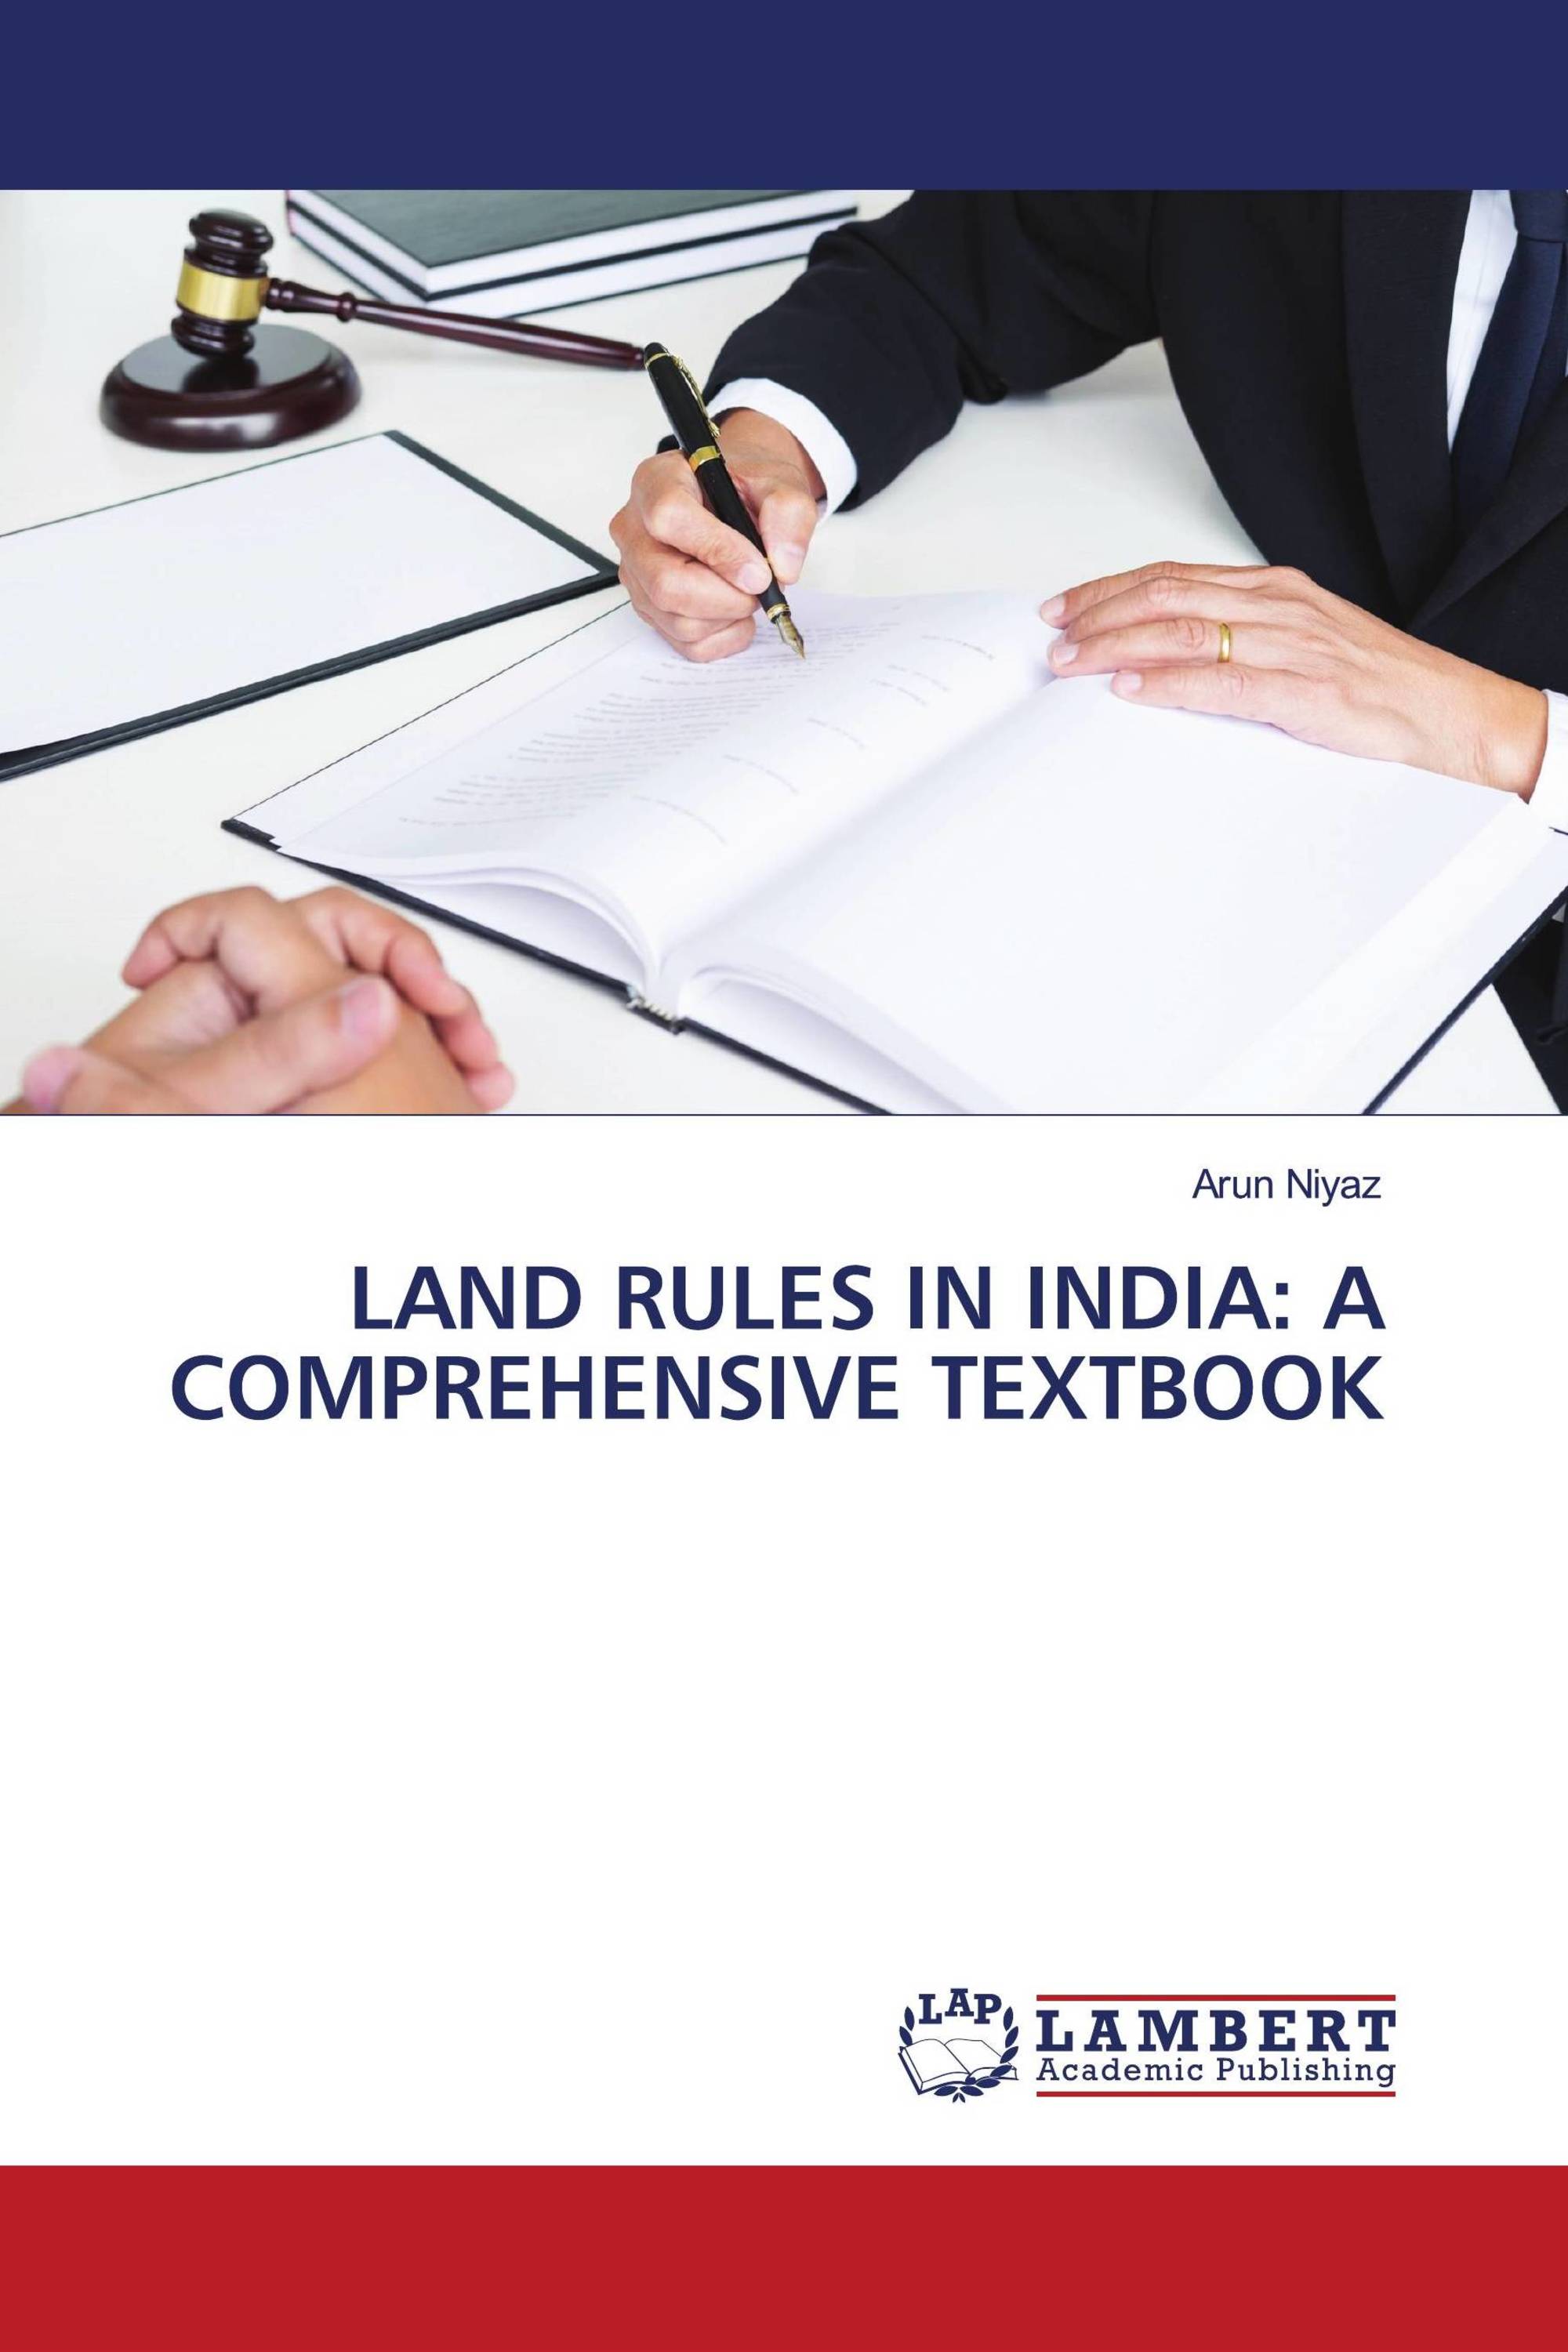 research paper on land laws in india